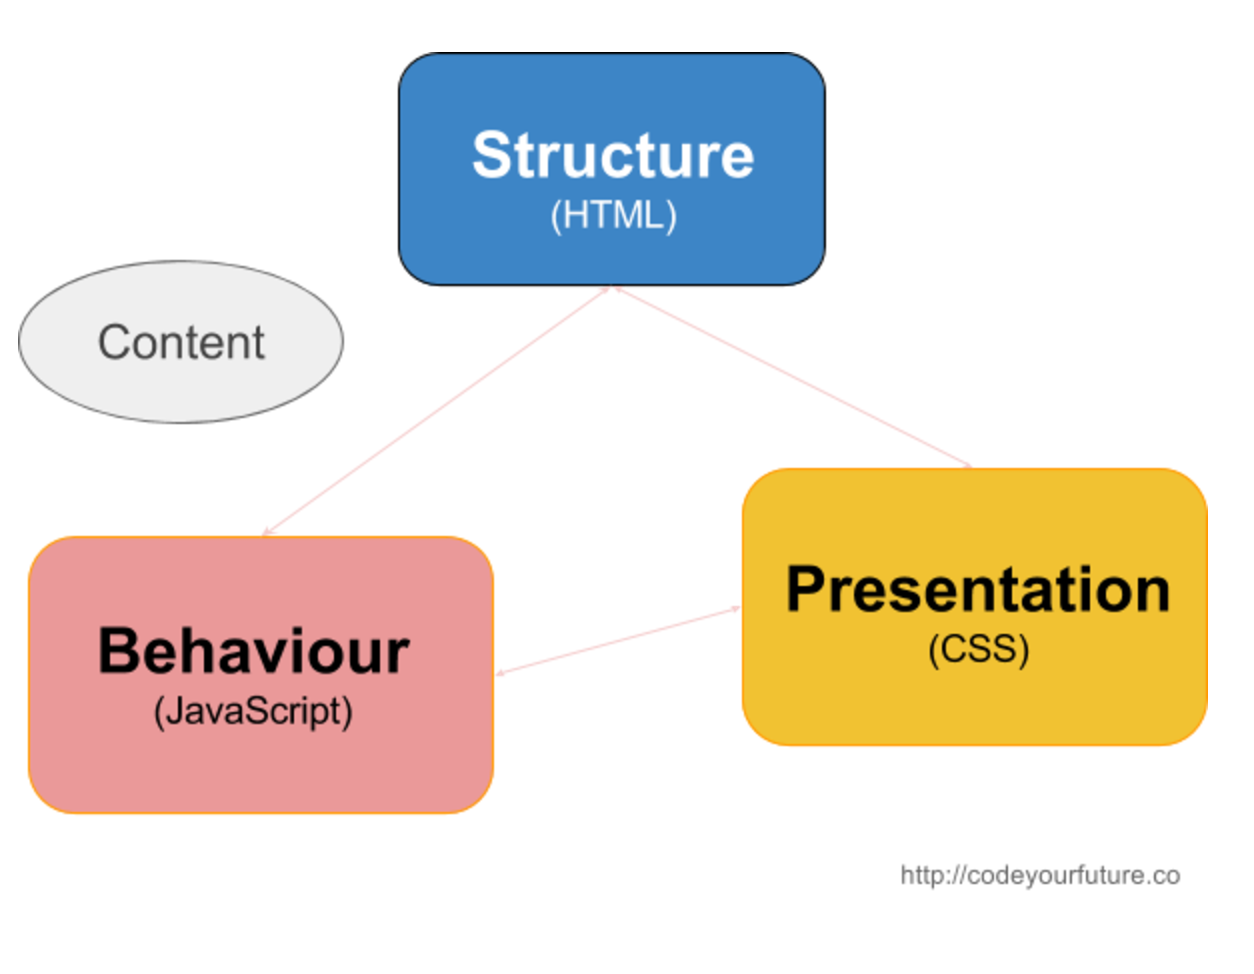 Diagram showing that structure (HTML), presentation (CSS), and behaviour (JavaScript) are interlinked